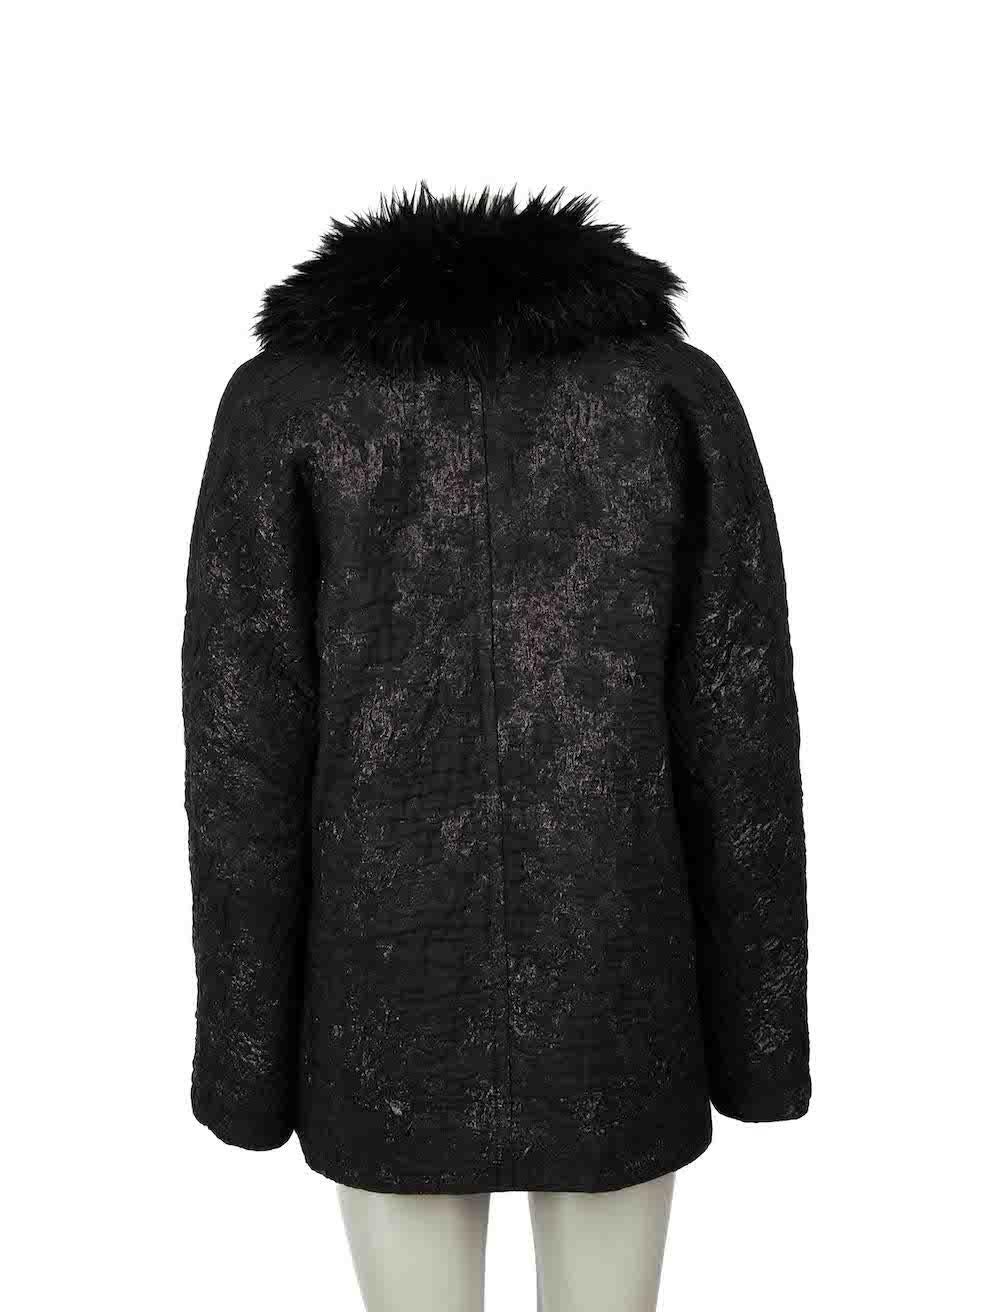 Lanvin Black Crushed Texture Fur Trim Coat Size XS In Good Condition In London, GB